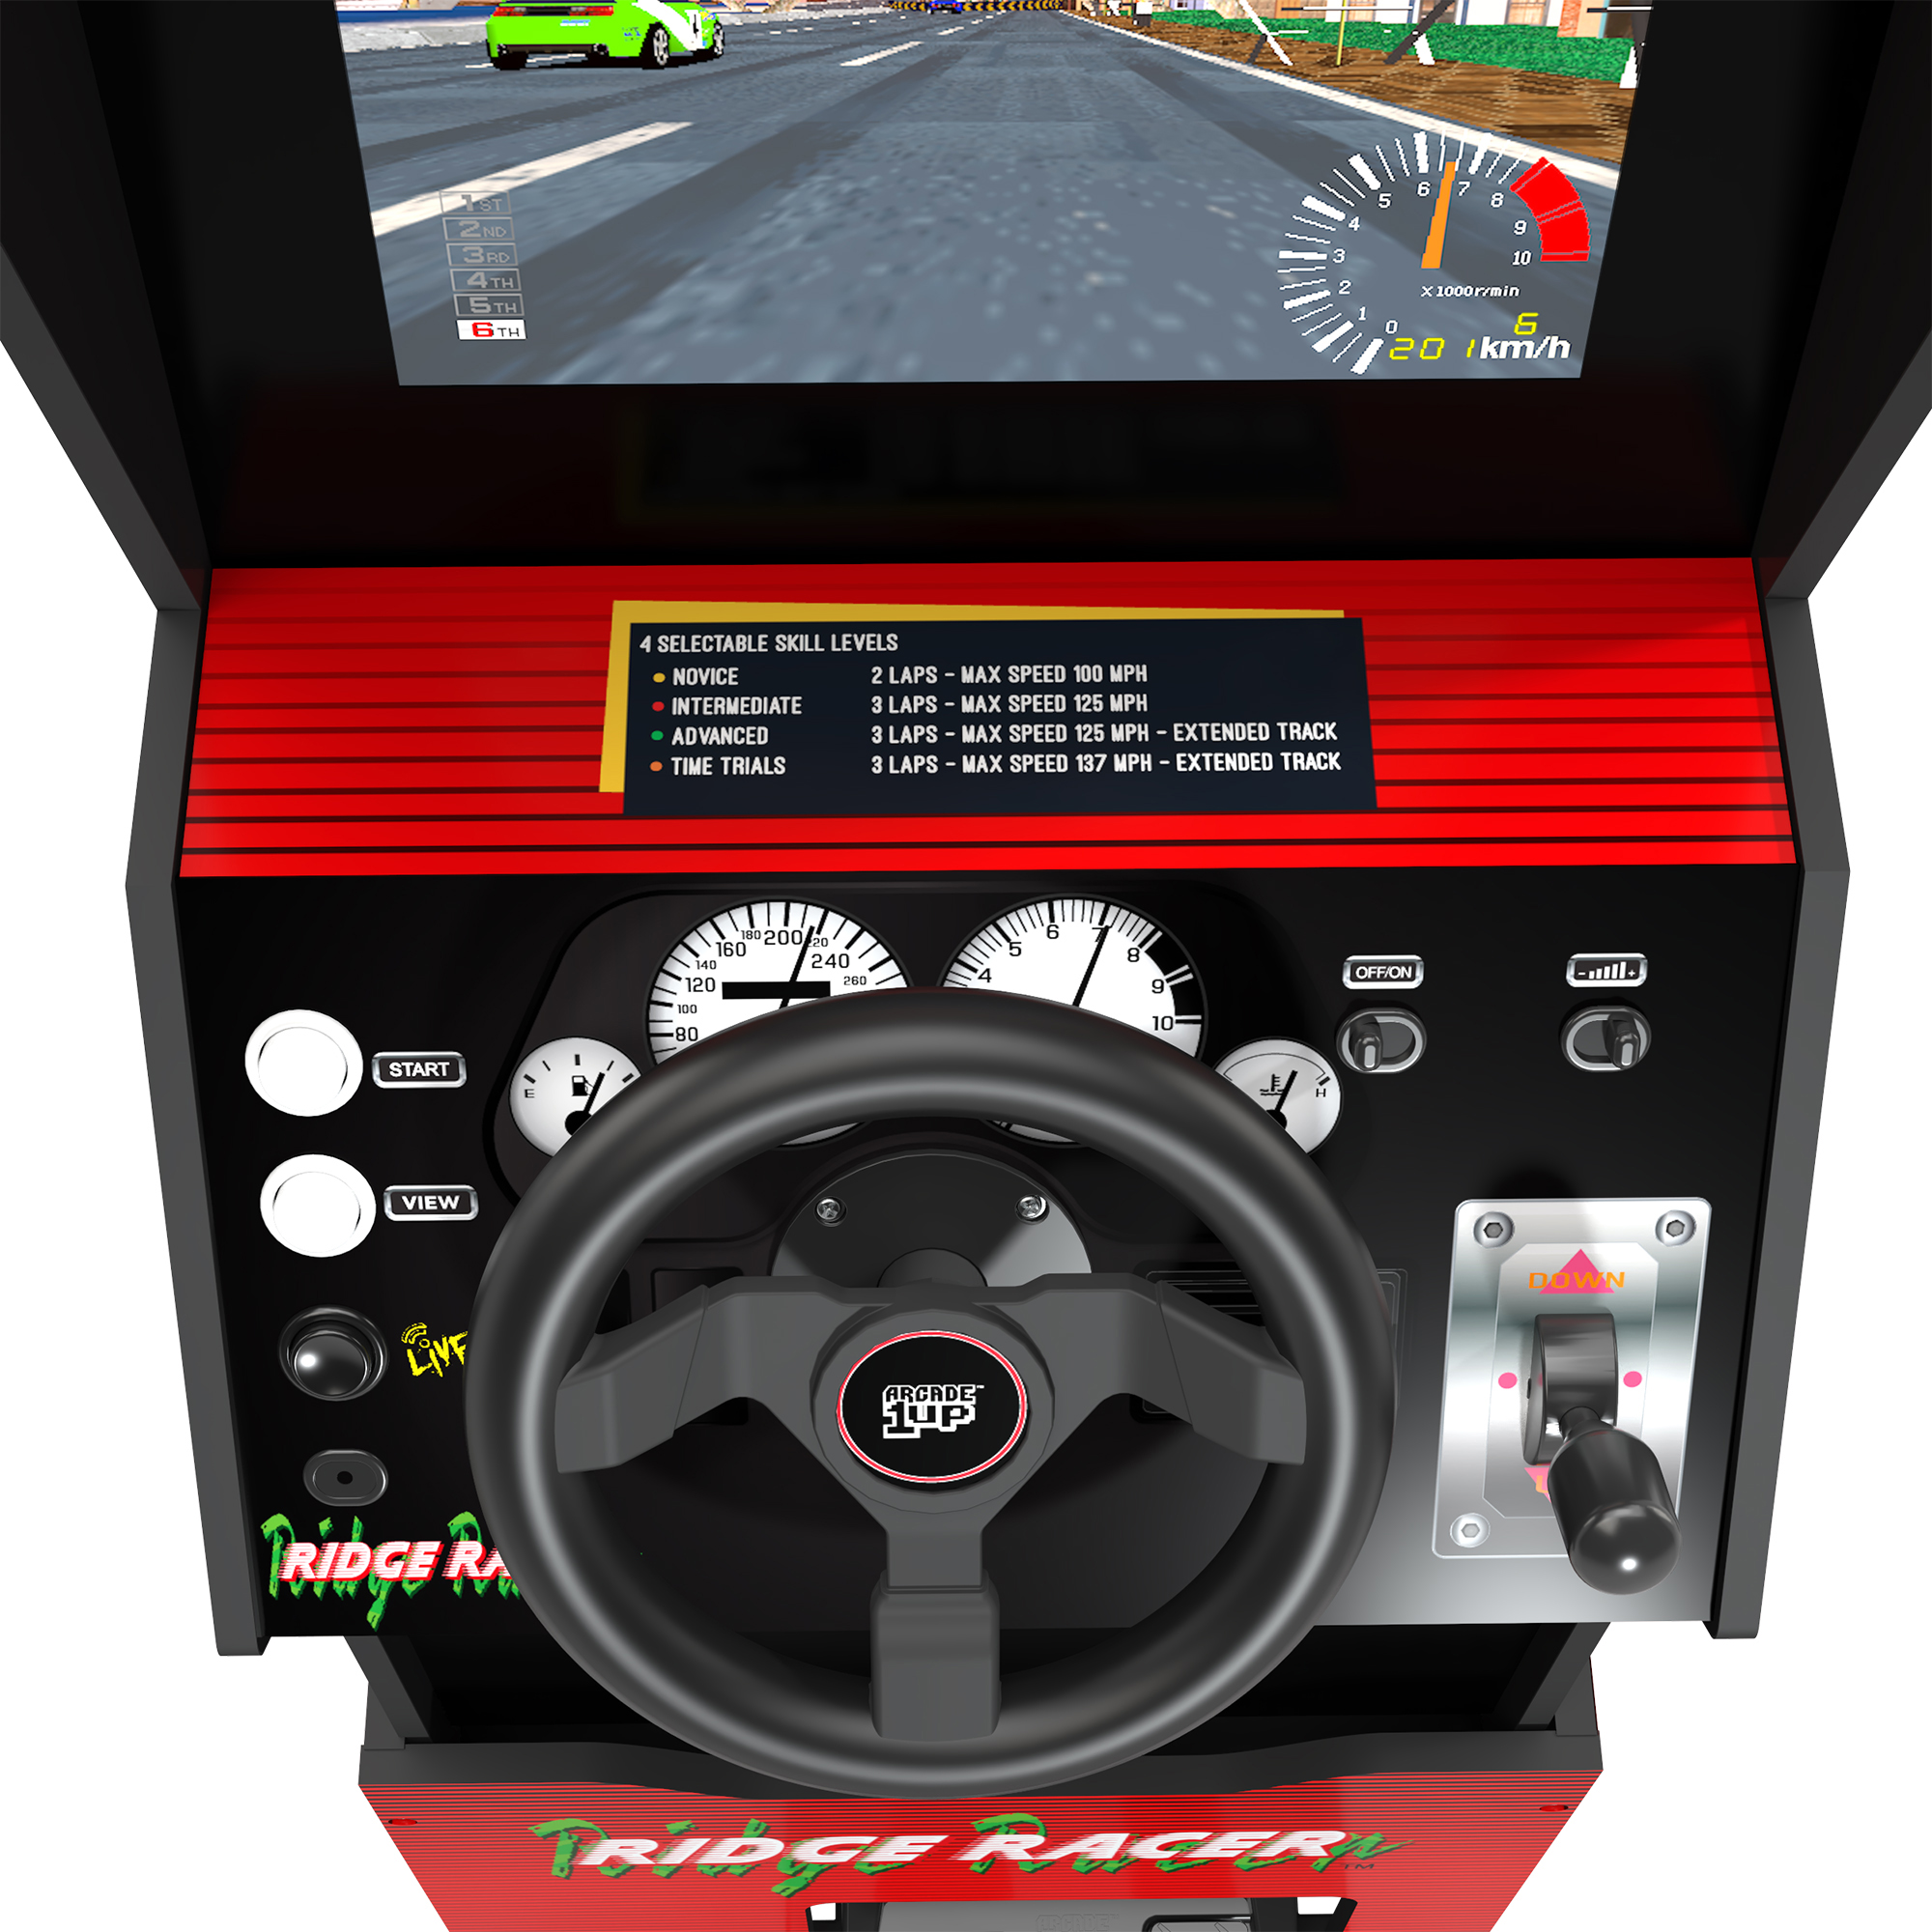 Arcade1UP - Ridge Racer - 5 Games in 1 Arcade with Rumble Steering Wheel and Lit Marquee - image 5 of 13